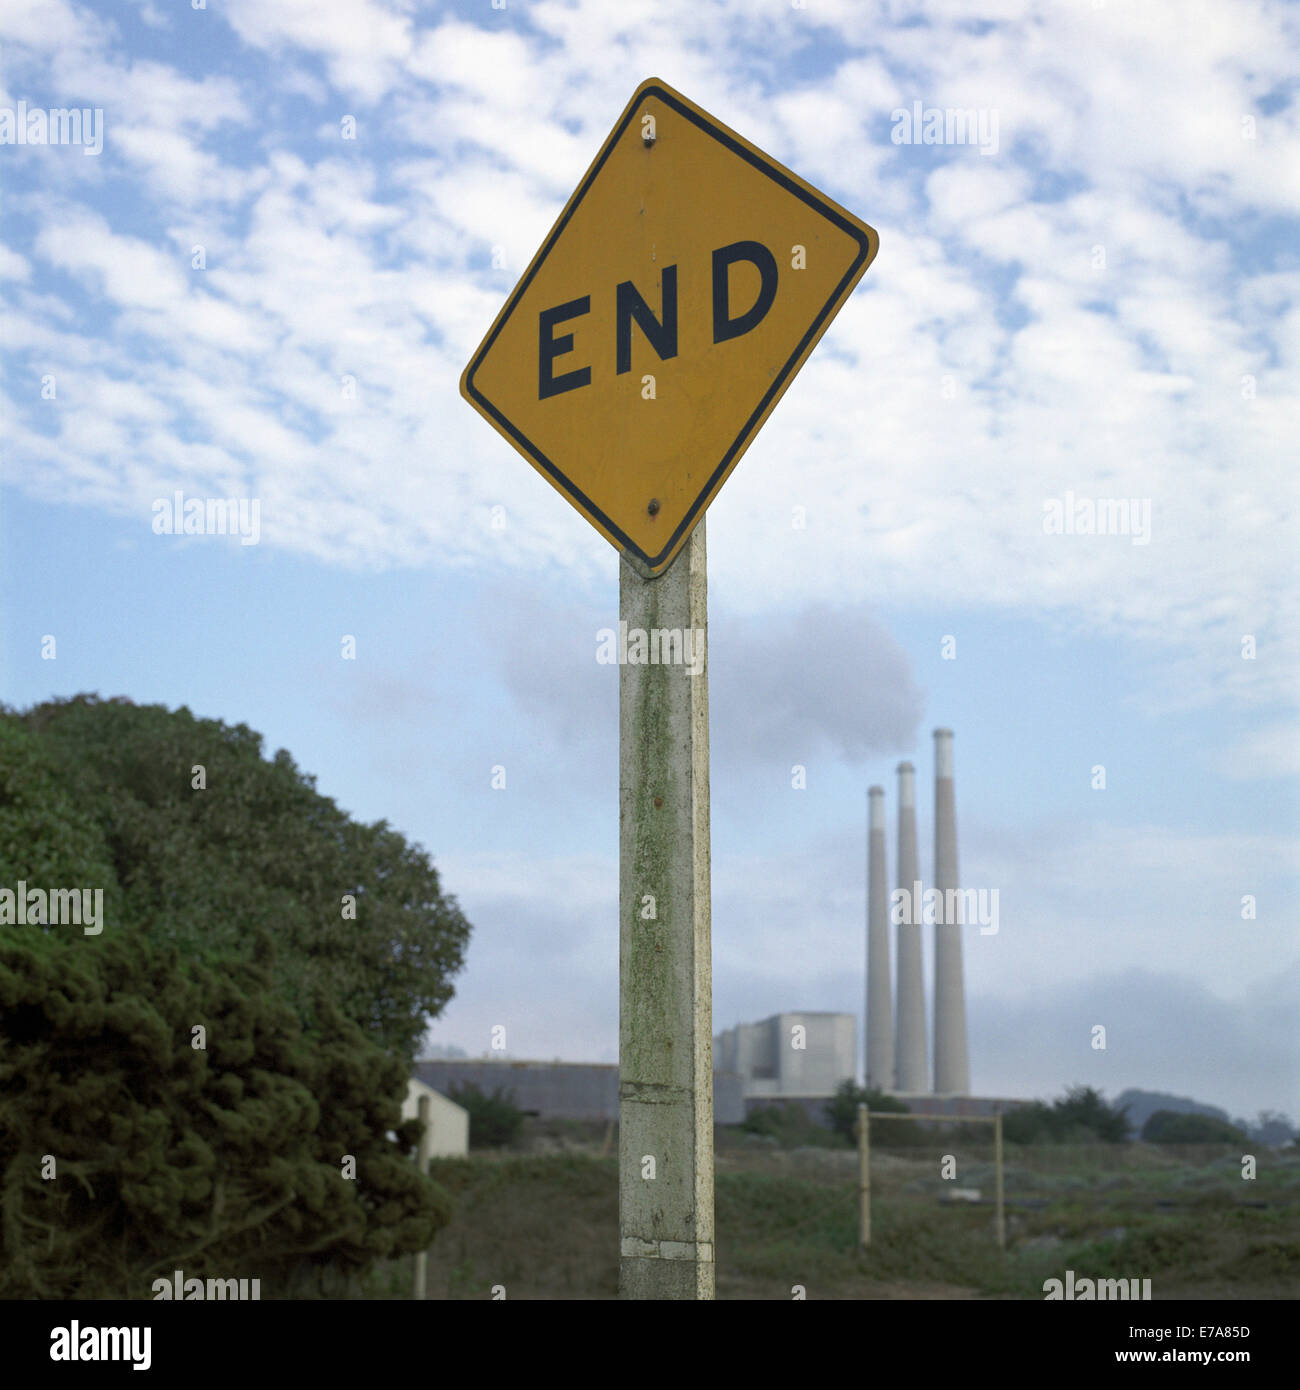 A dead end road sign in foreground, smoke stacks emitting smoke in background Stock Photo